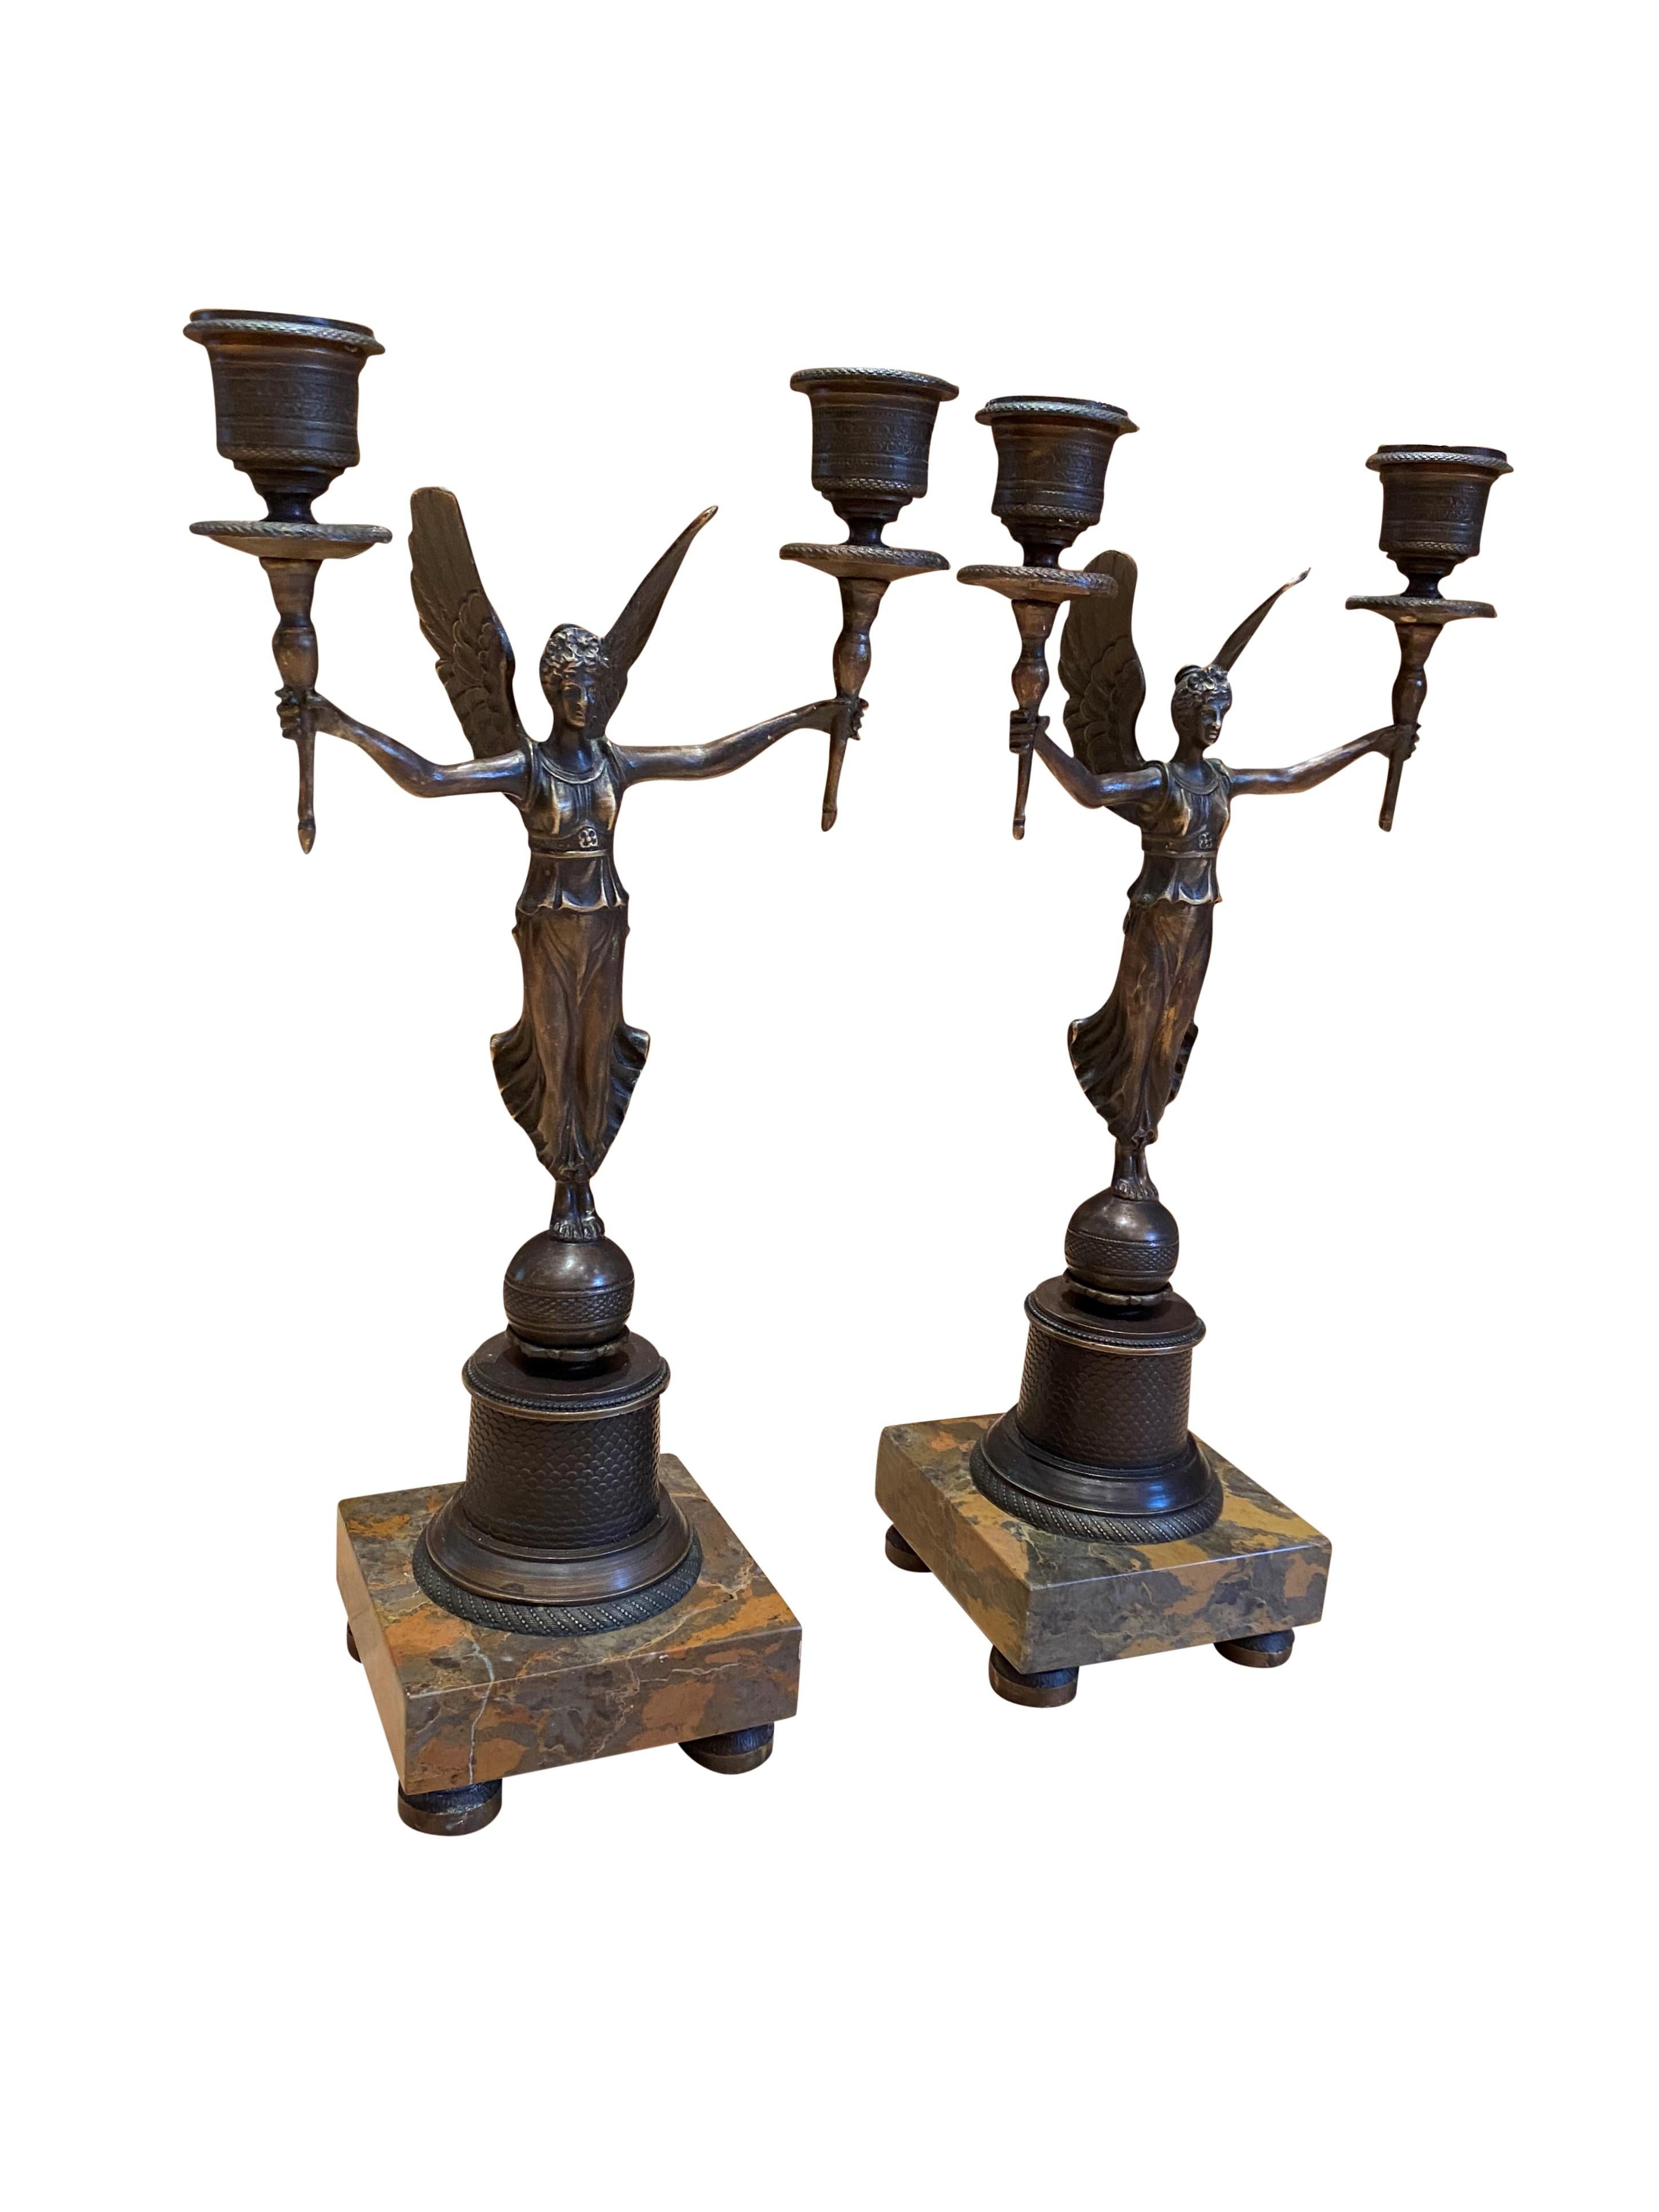 A stunning pair of French bronze Empire style candelabras. Perfect left and right, each maiden holds aloft the two ormolu candle branches. The pair Stand on a globe ball with pattern frieze on a beautiful two-tone marble.